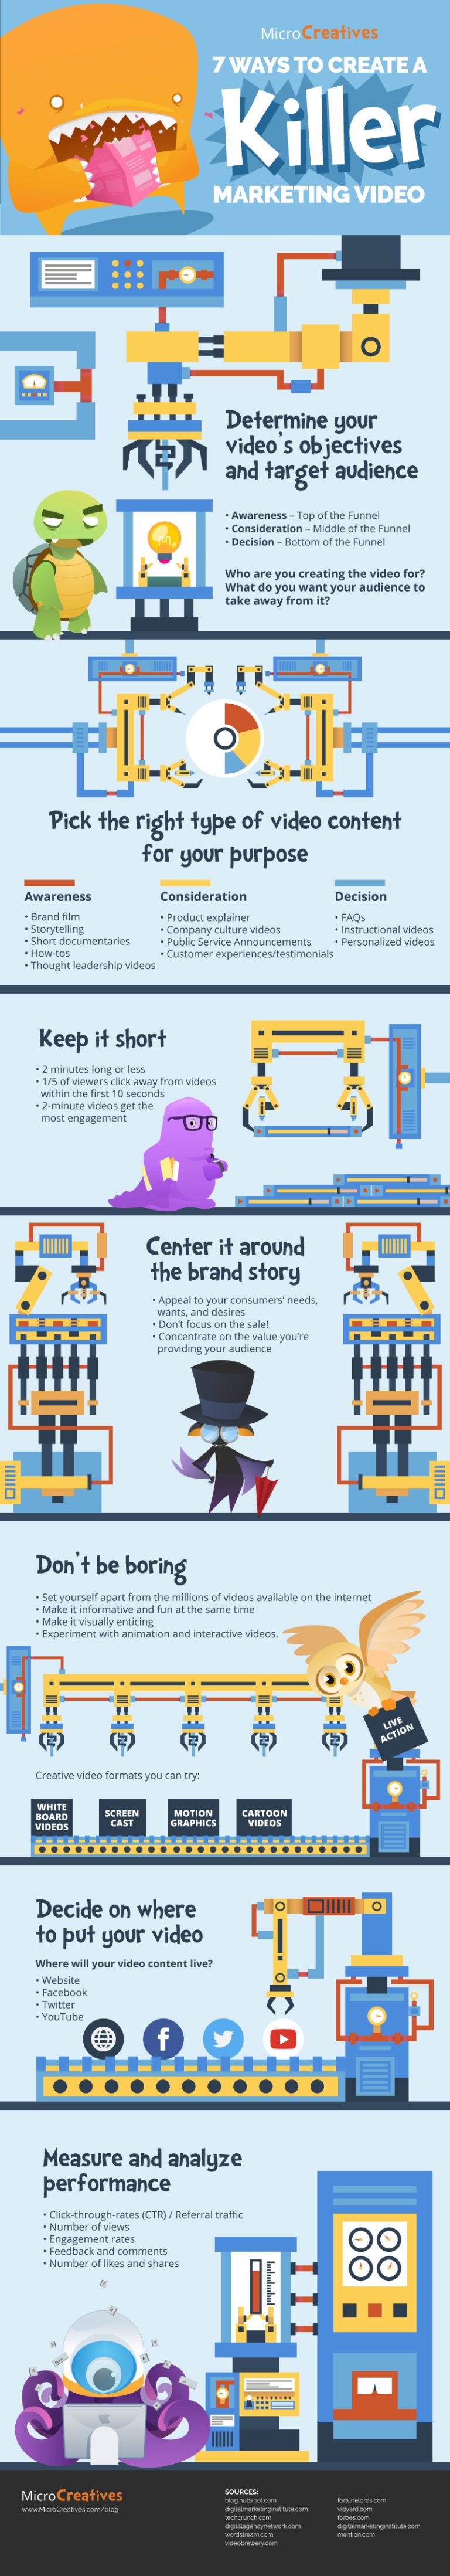 7 Steps to Create a Killer Marketing Video Infographic